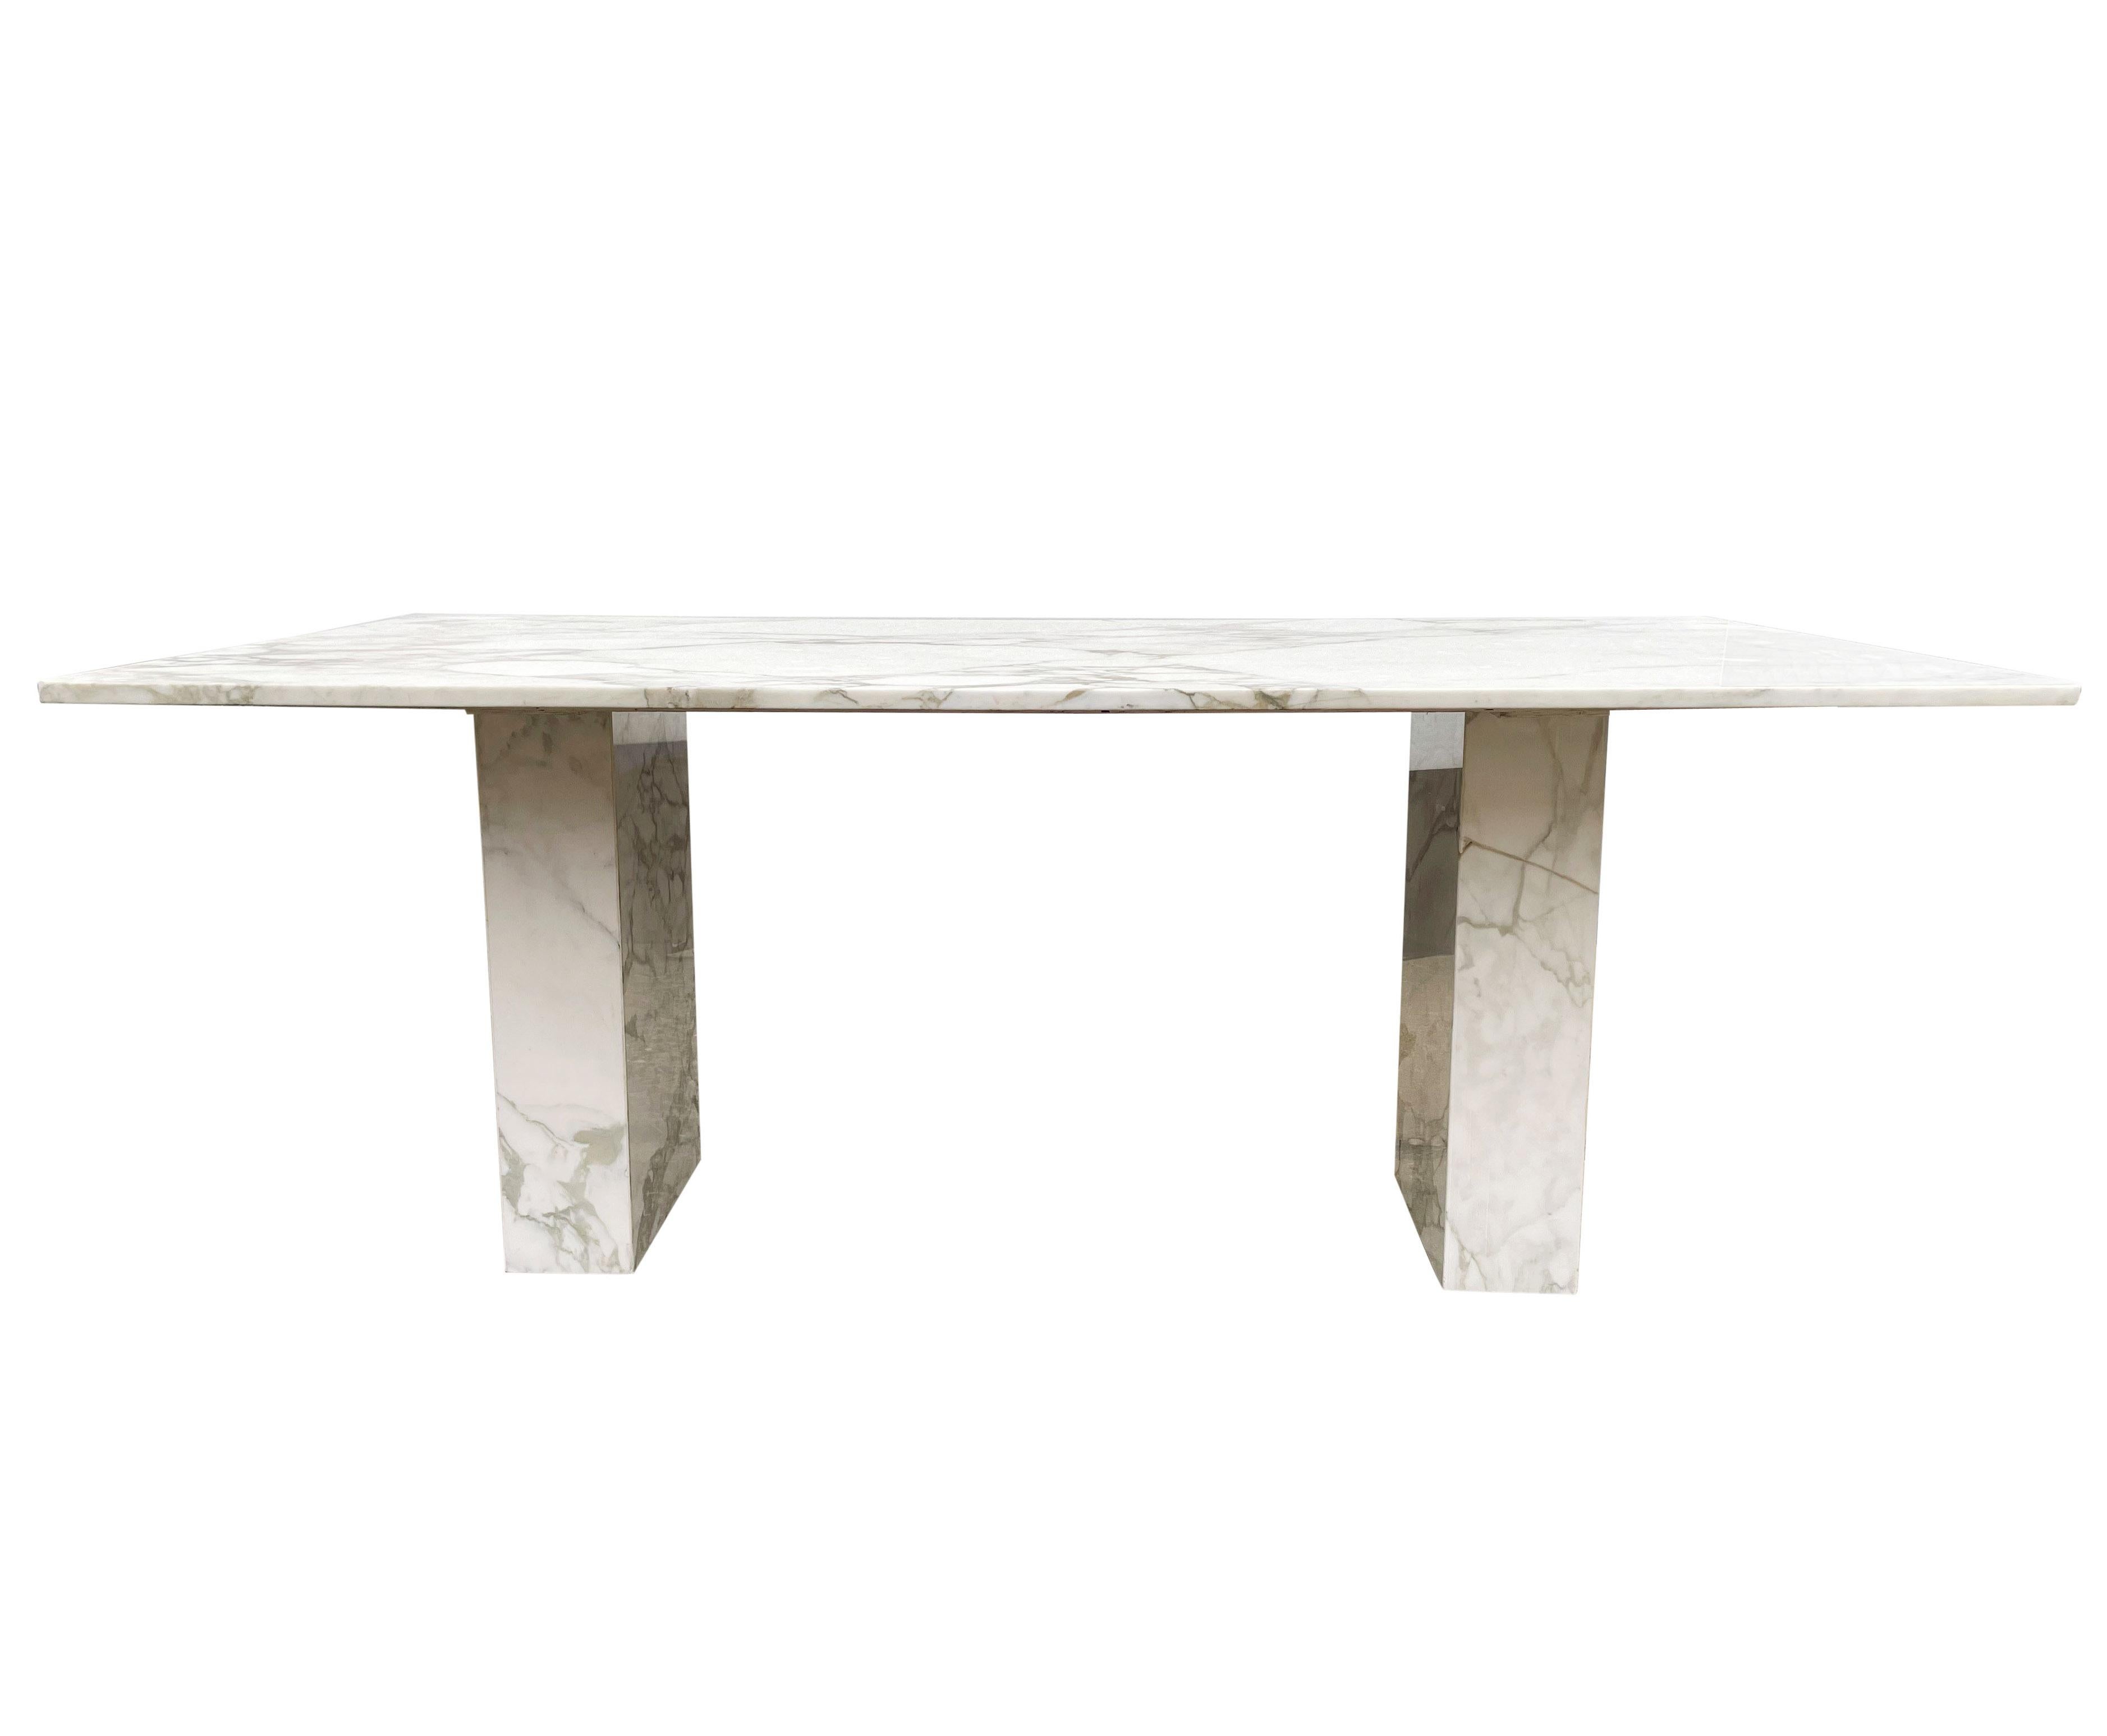 A stunning clean line design imported from Italy, circa 1960s. This dining table consists of calacatta marble slab construction. Beautiful gray and taupe veining on white base color.